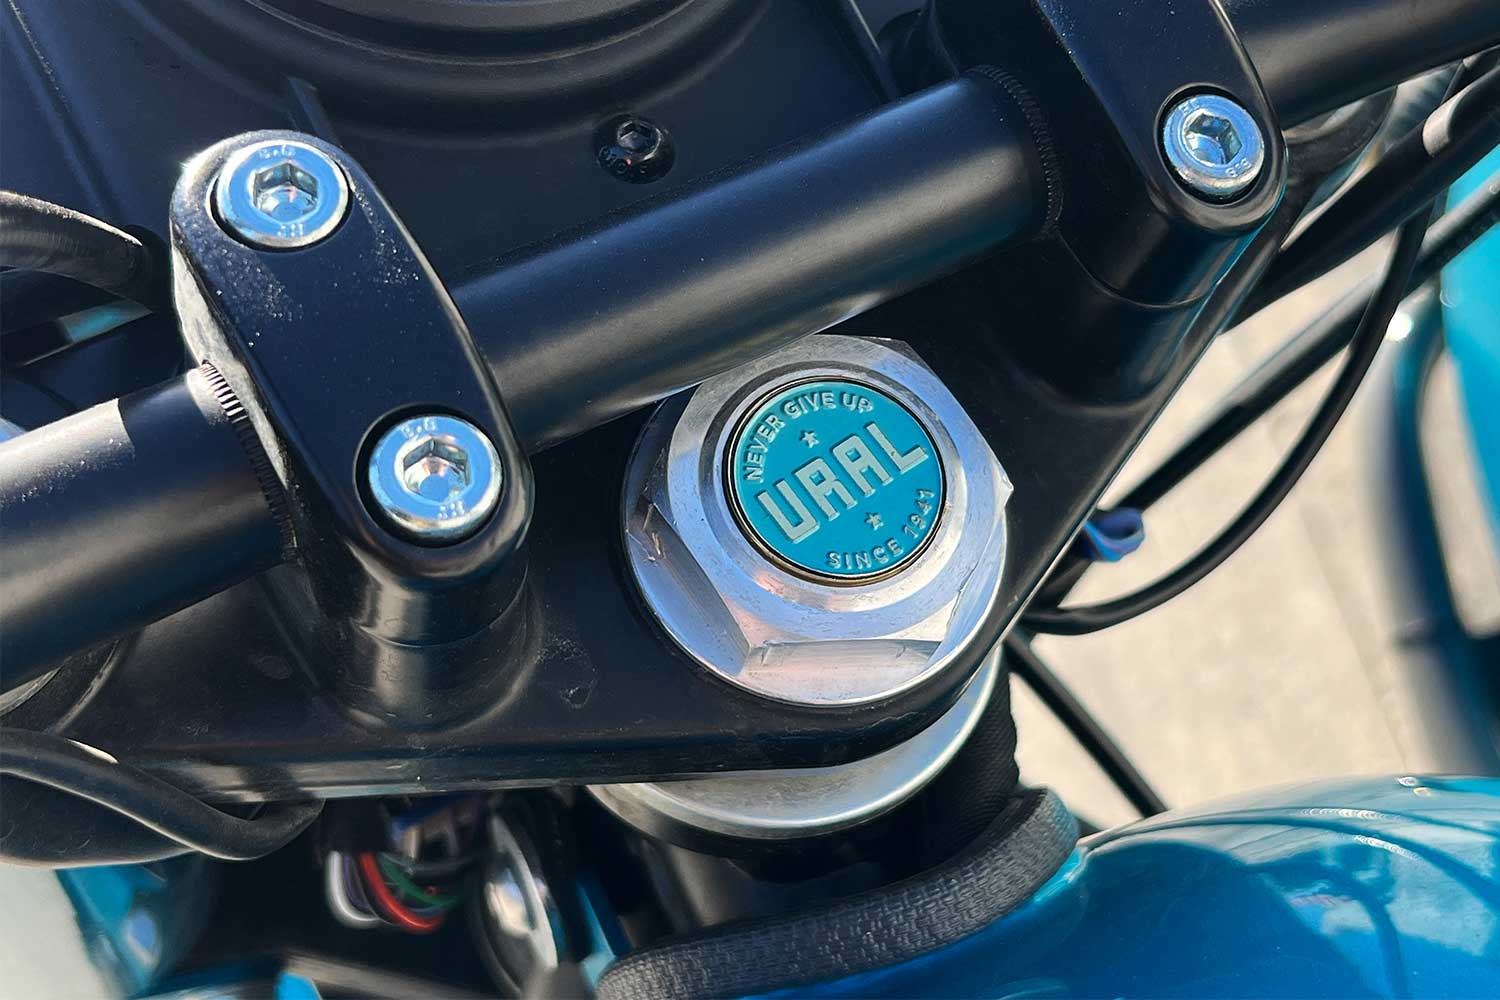 A bolt on a Ural sidecar motorcycle that reads "Never Give Up" and "Since 1941"